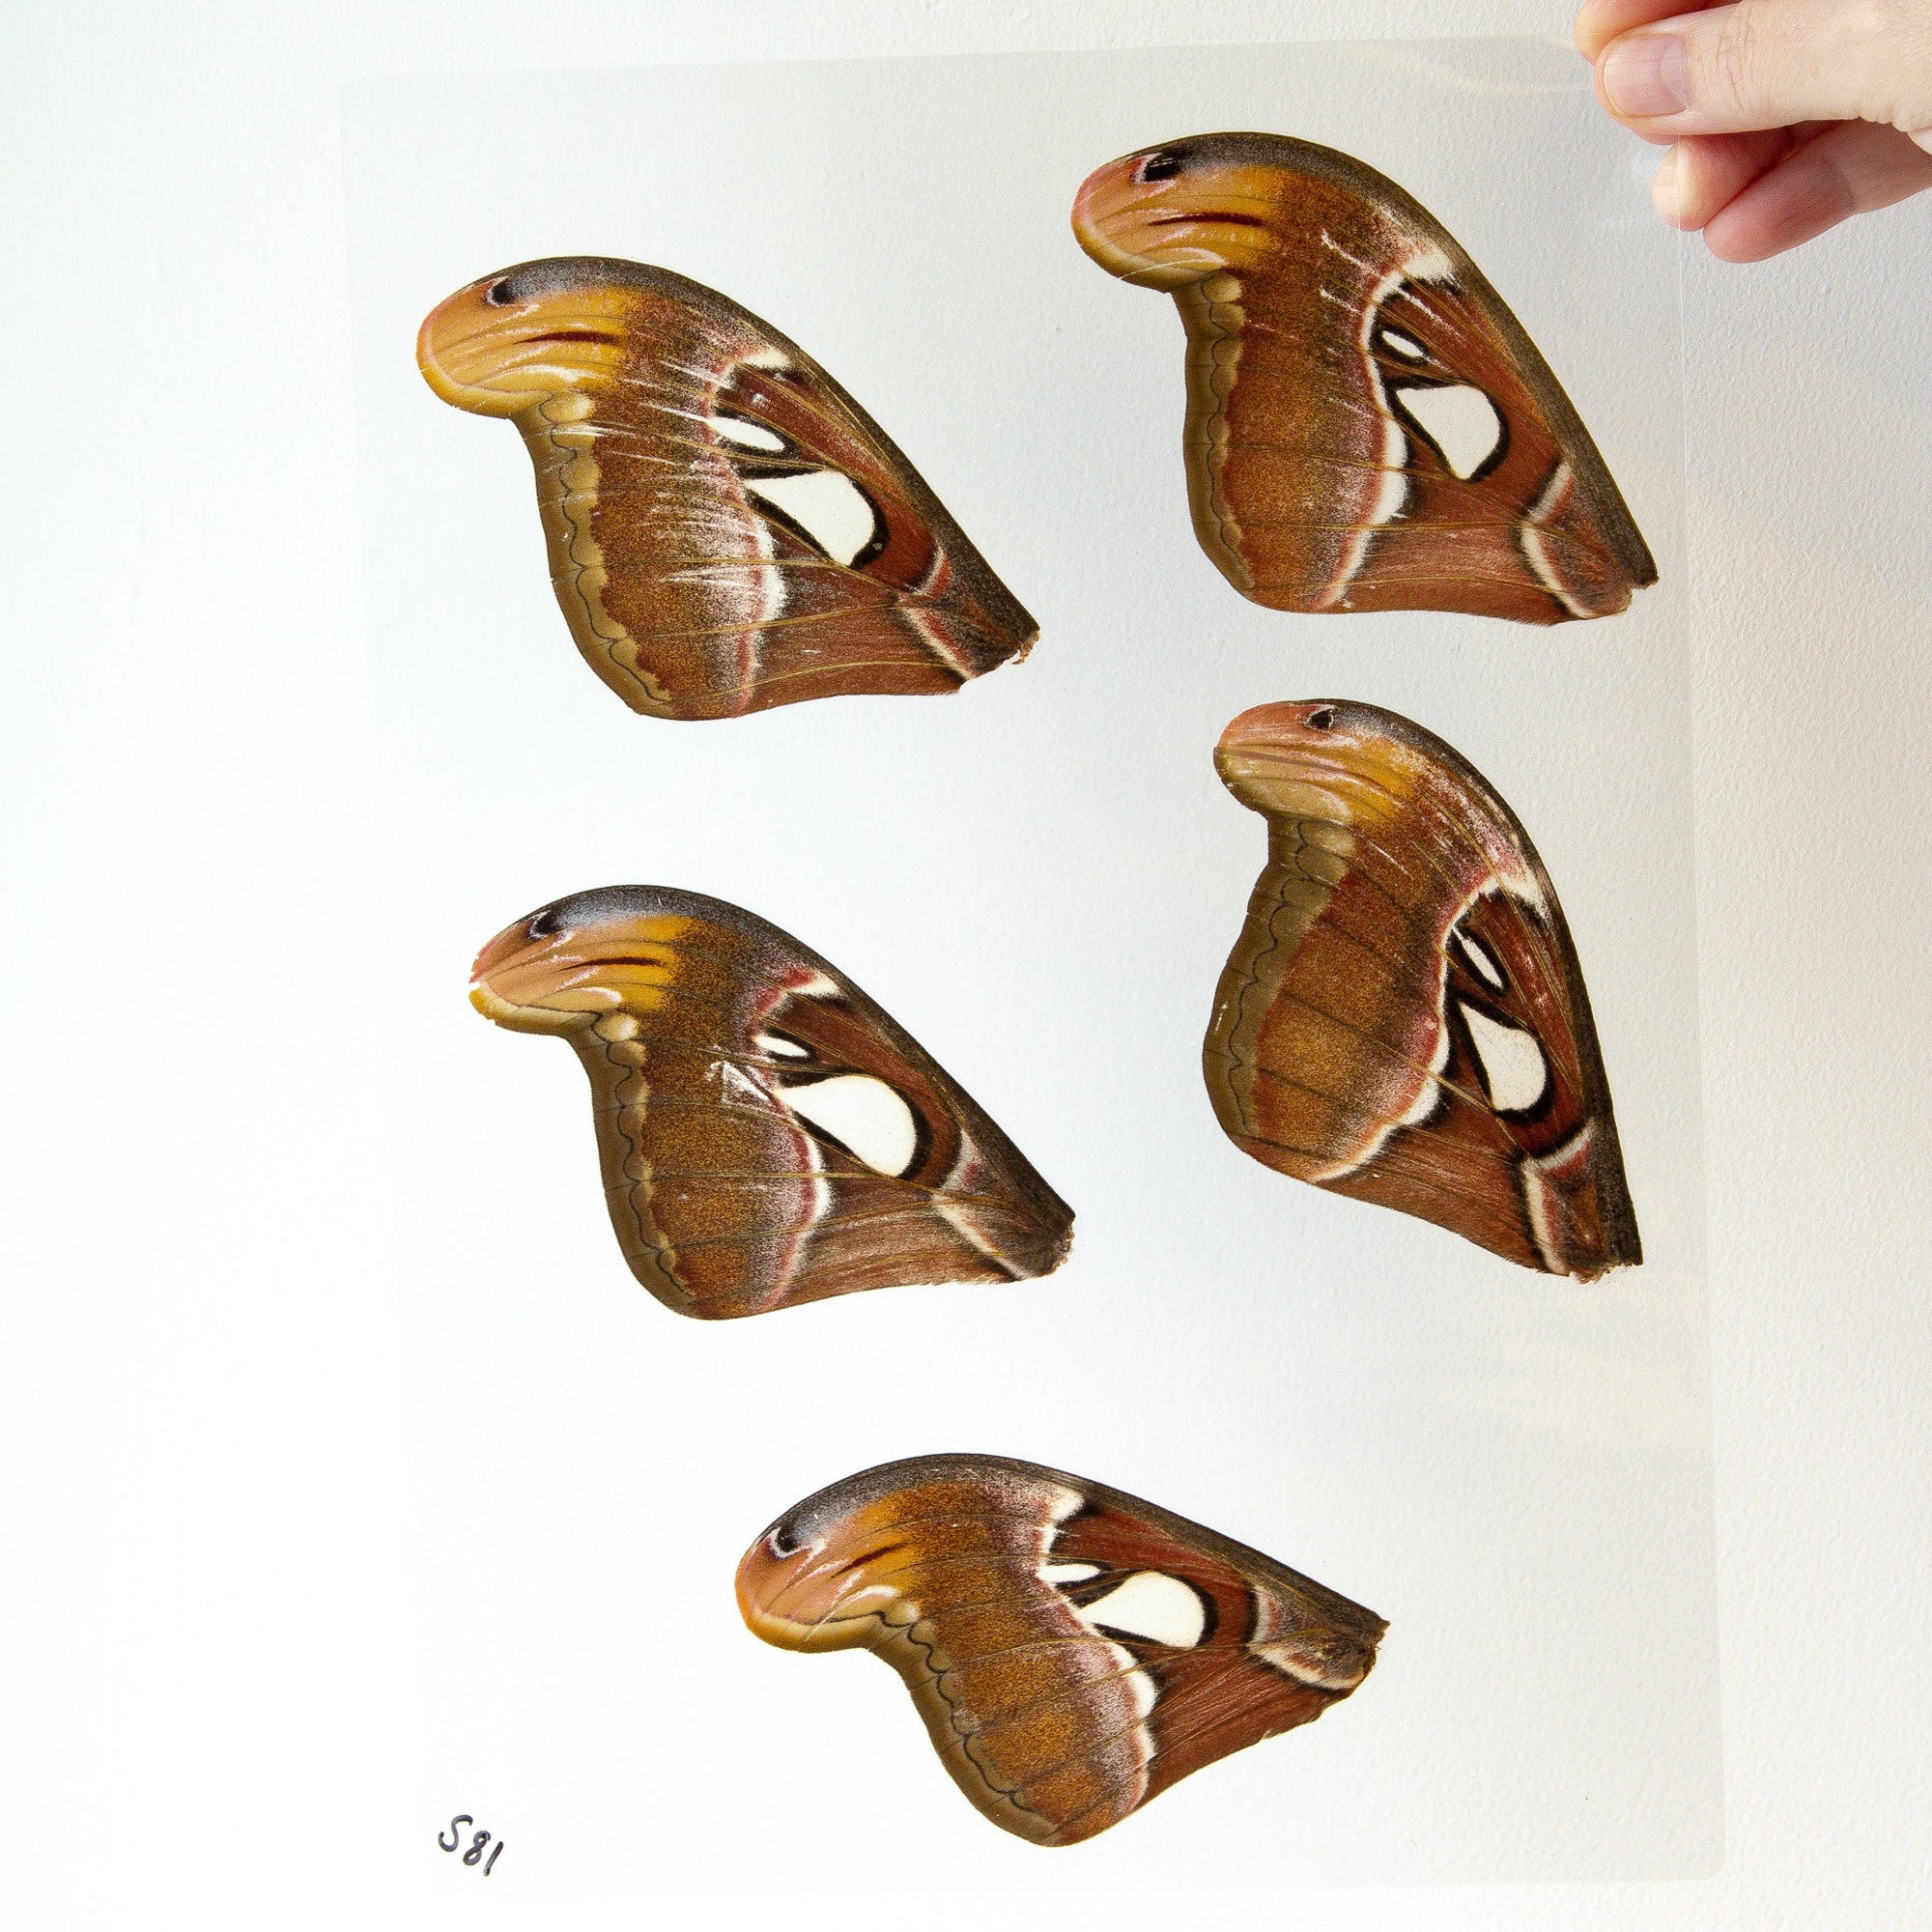 Butterfly Wings GLOSSY LAMINATED SHEET Real Ethically Sourced Specimens Moths Butterflies Wings for Art -- S81